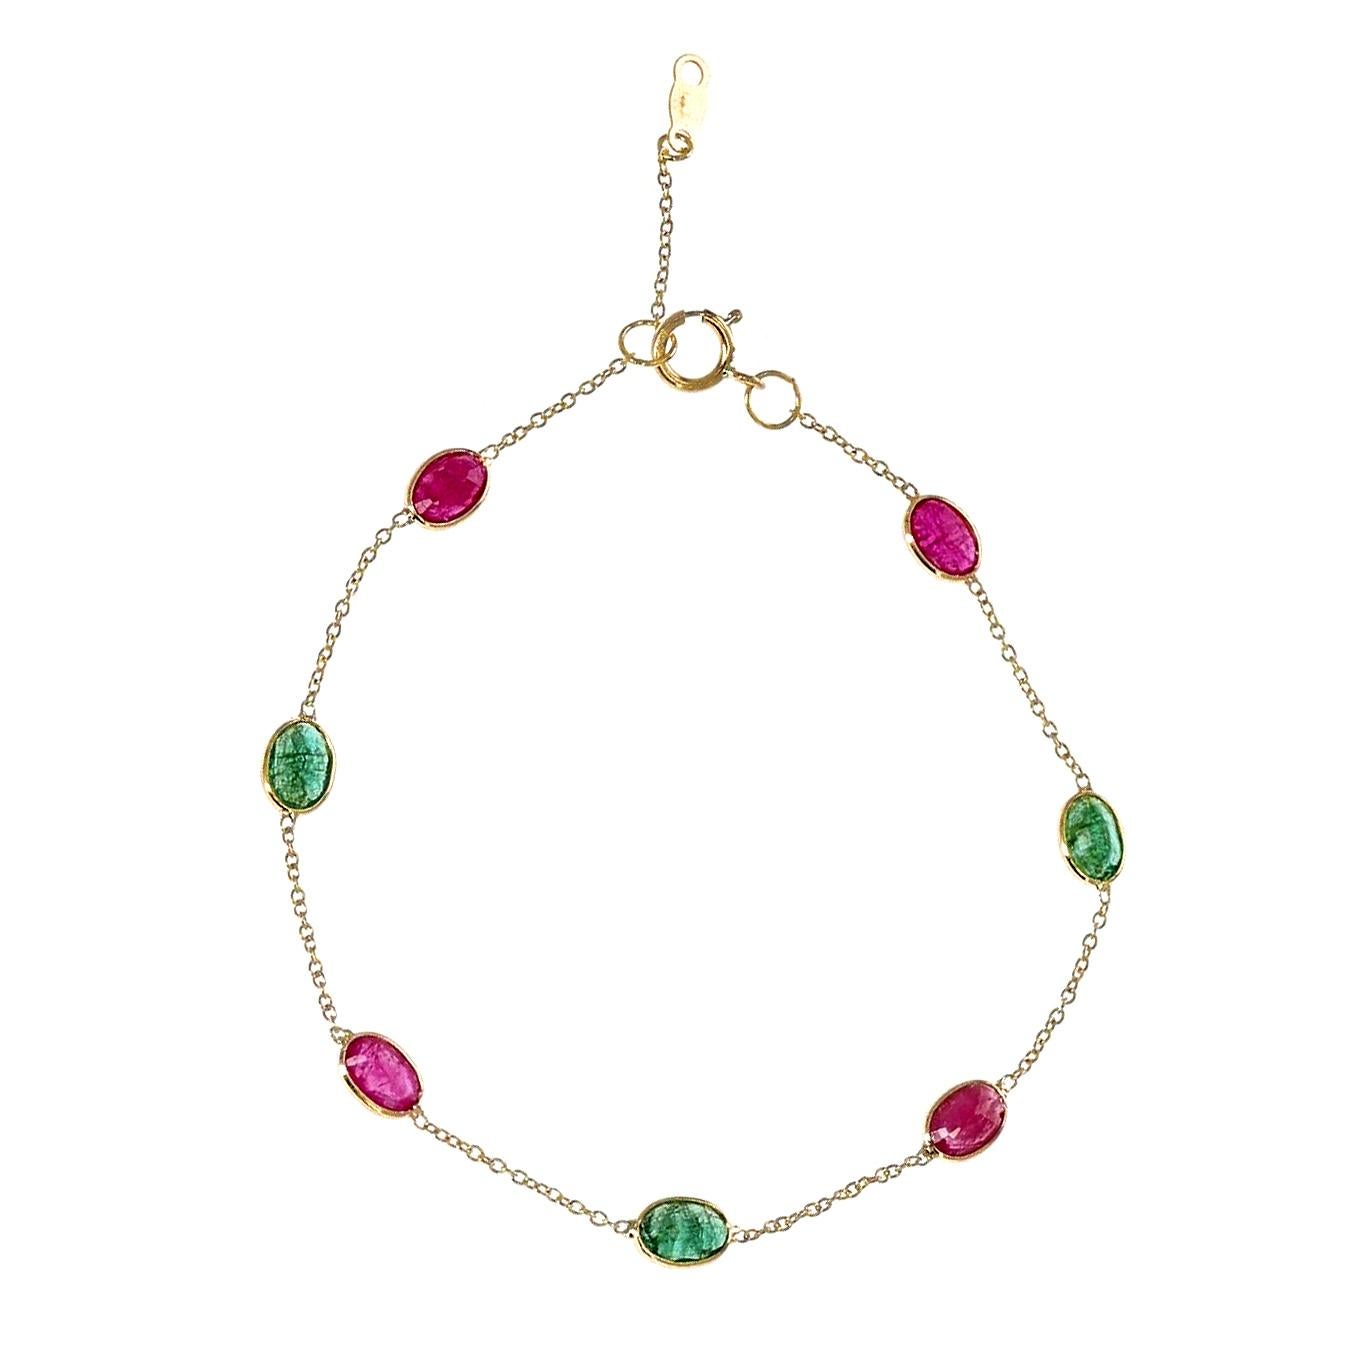 4 x 6 Oval Genuine Ruby and Emerald 18k Yellow Gold Adjustable Bracelet 1